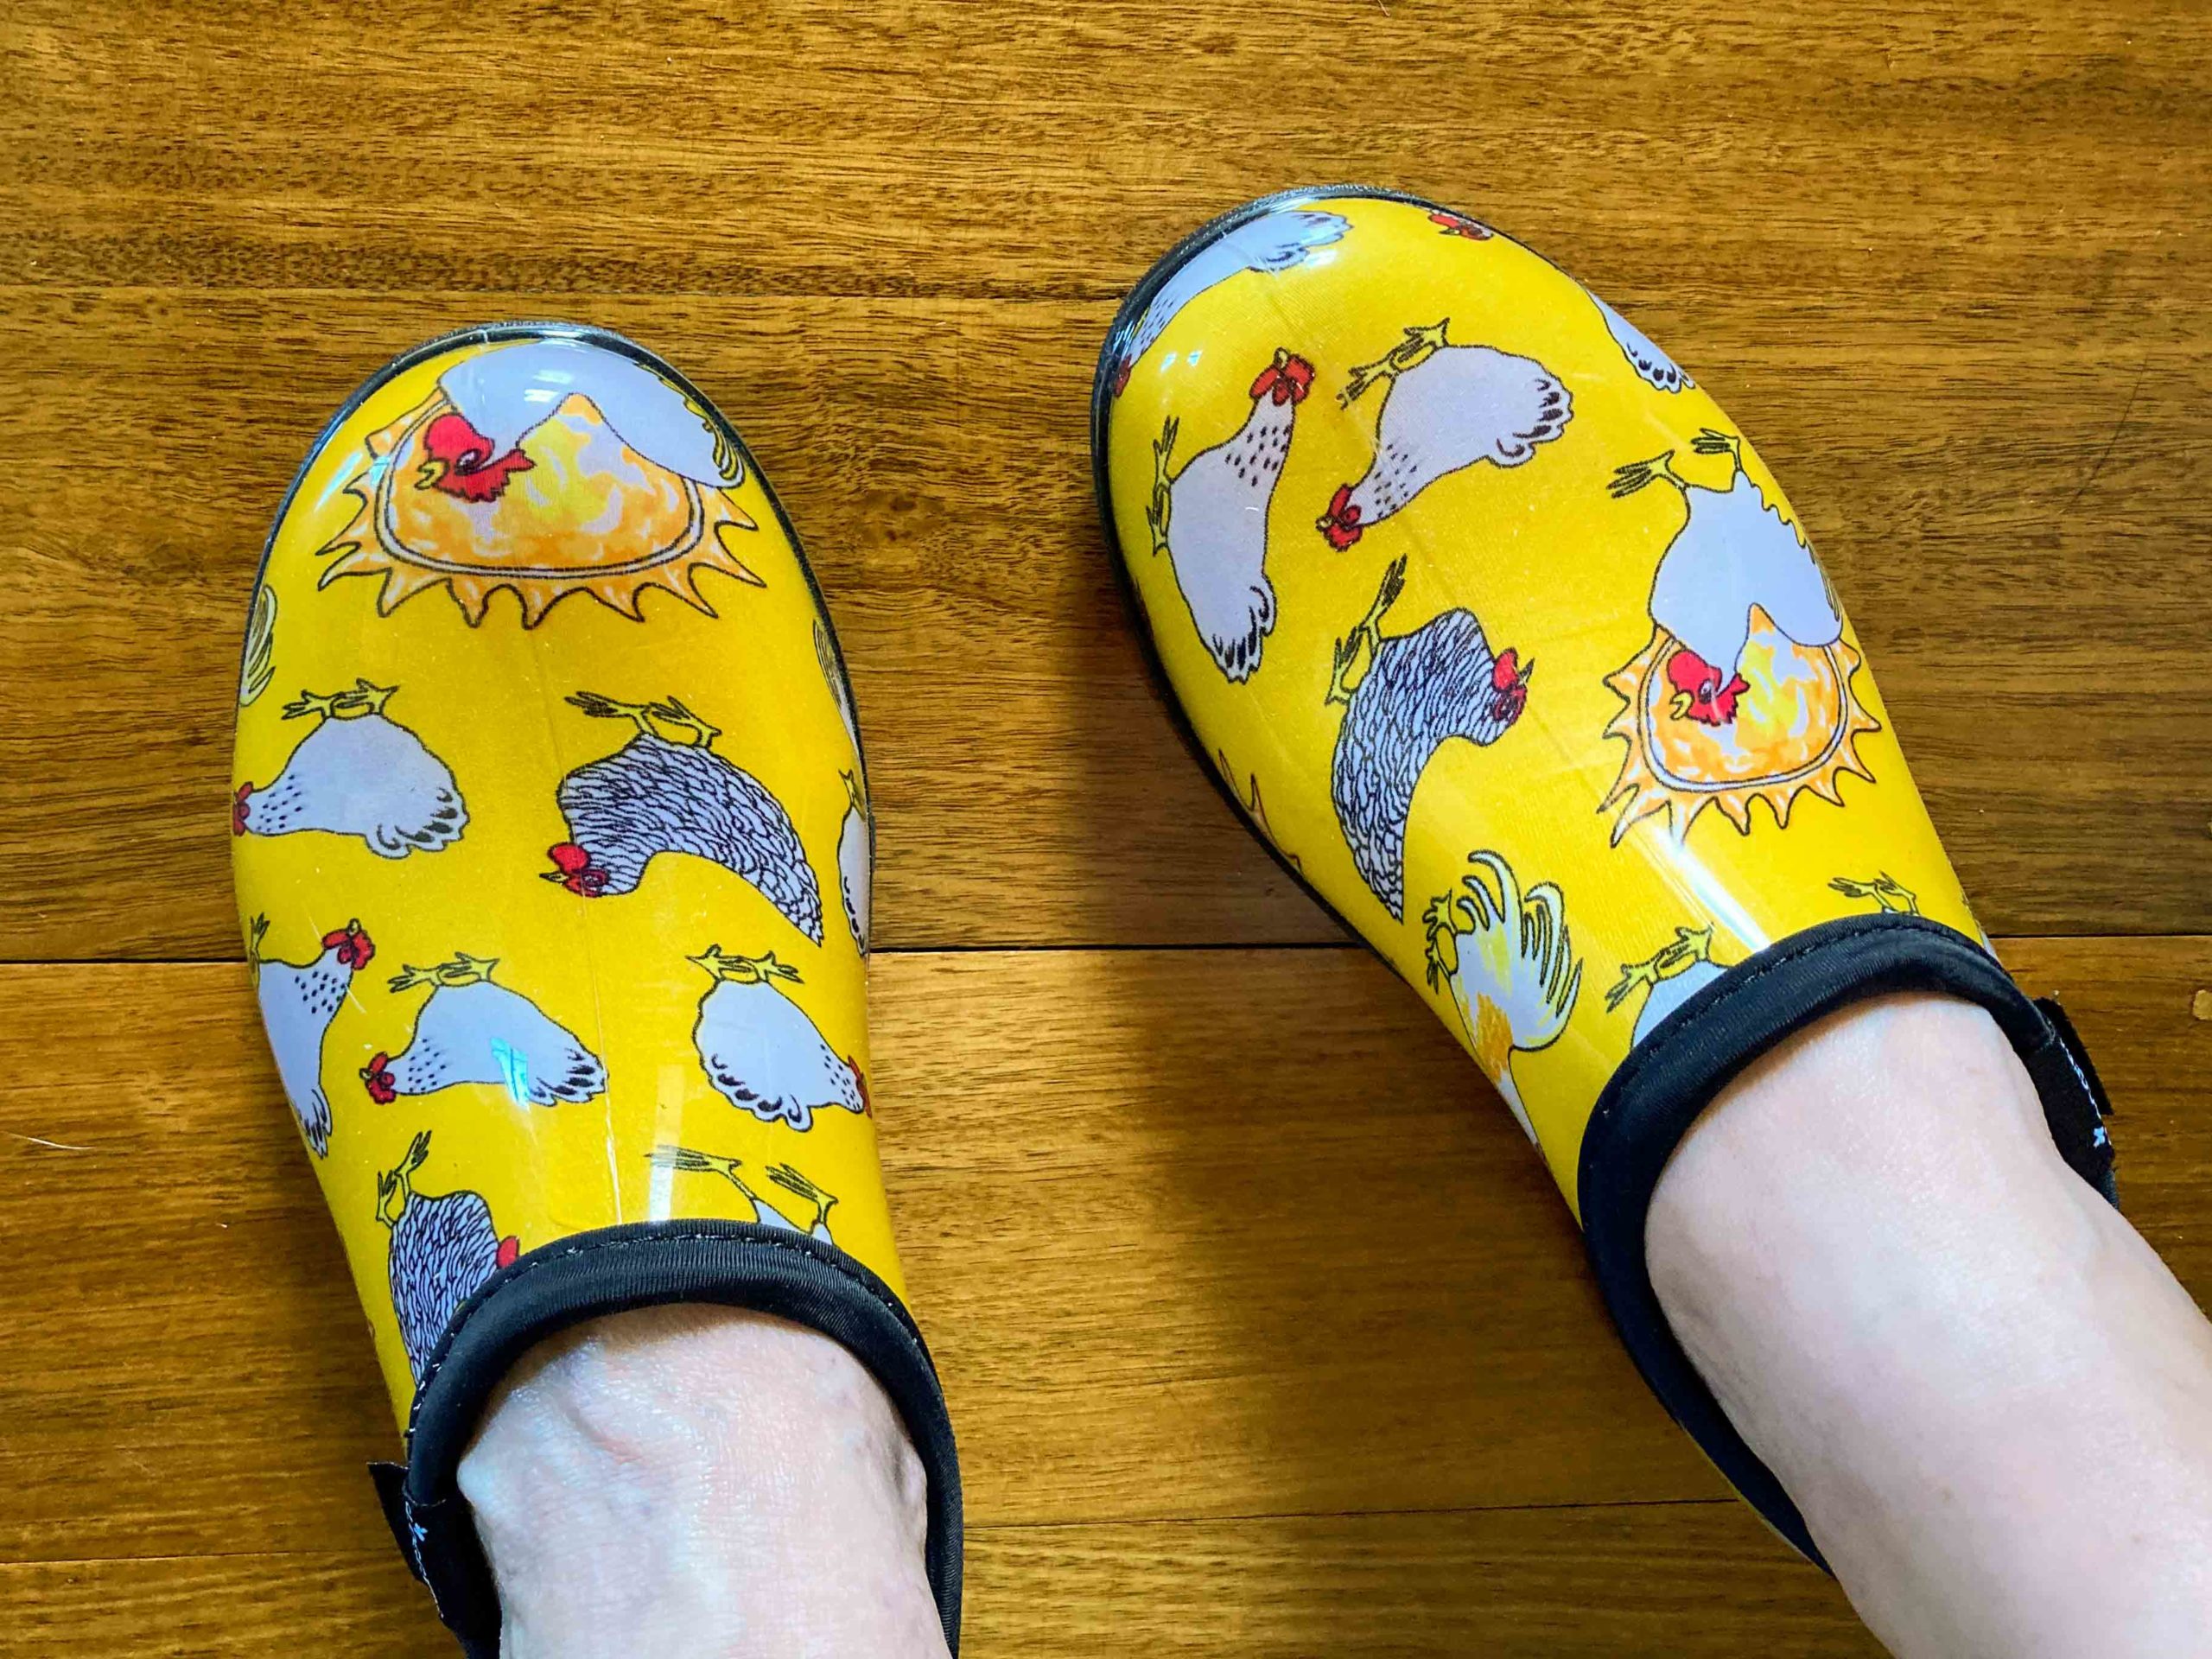 A pair of yellow clog-style shoes with white chicken images